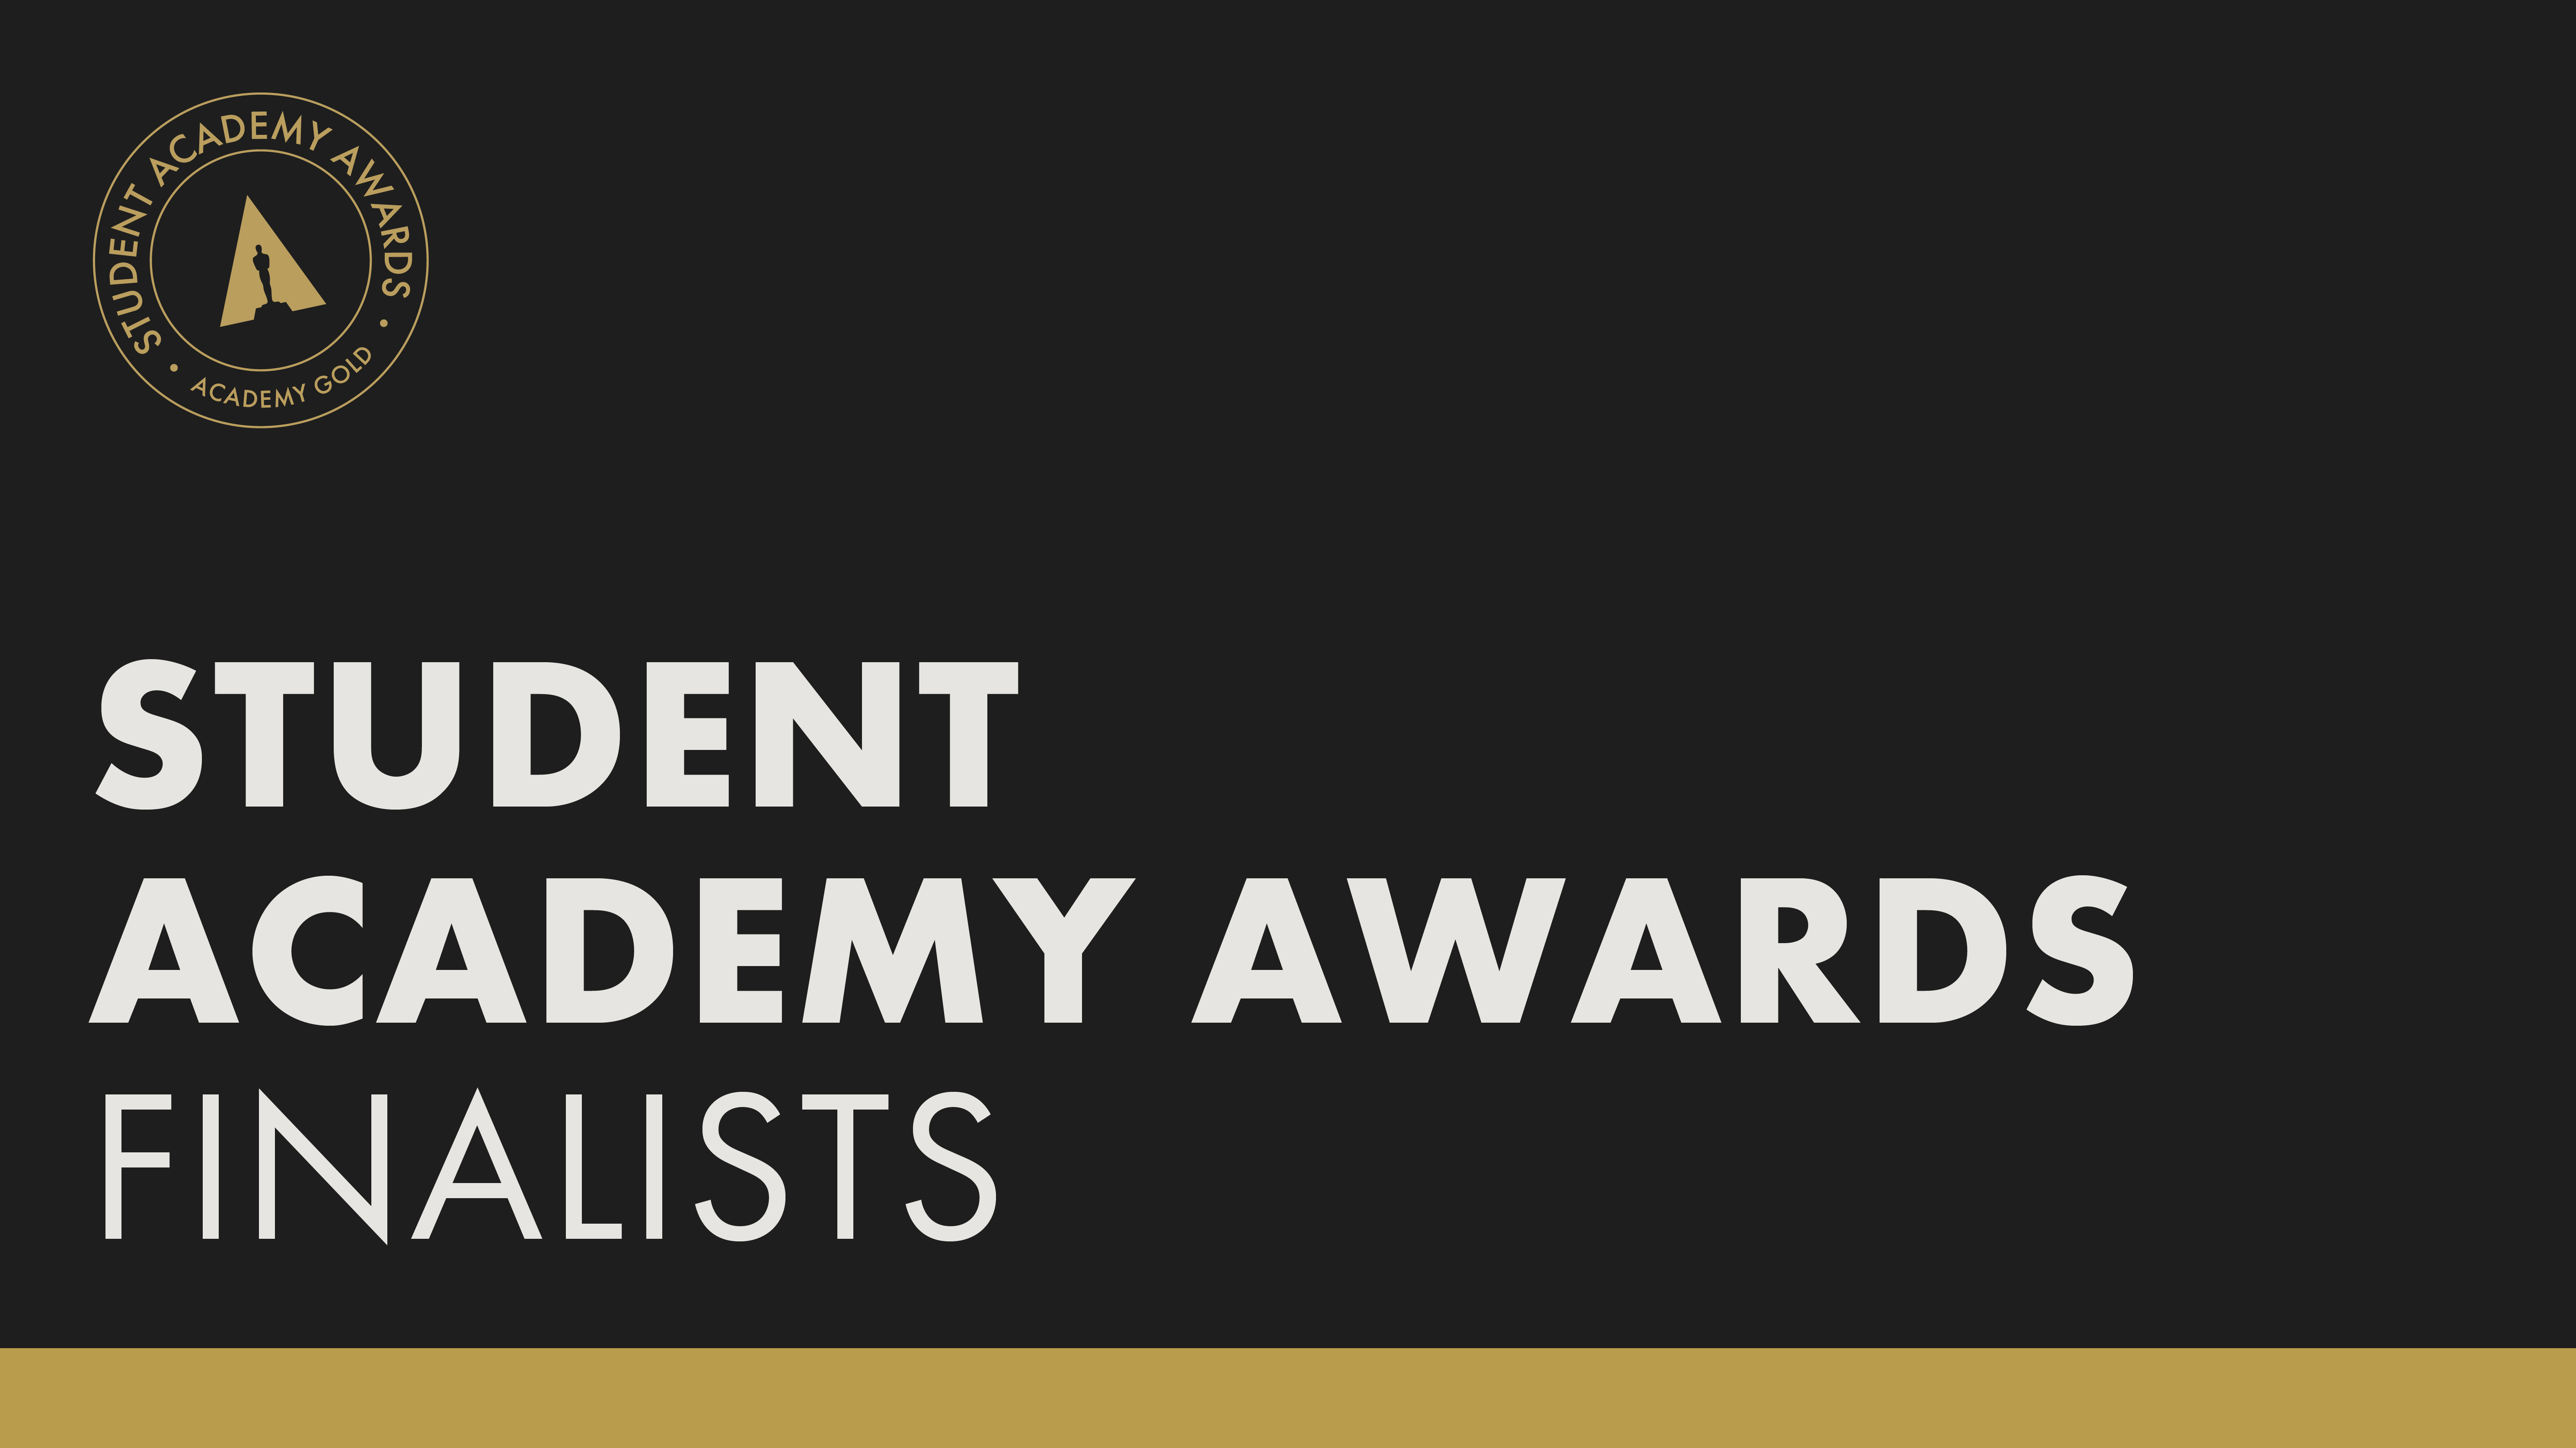 MEET THE 50TH STUDENT ACADEMY AWARDS FINALISTS